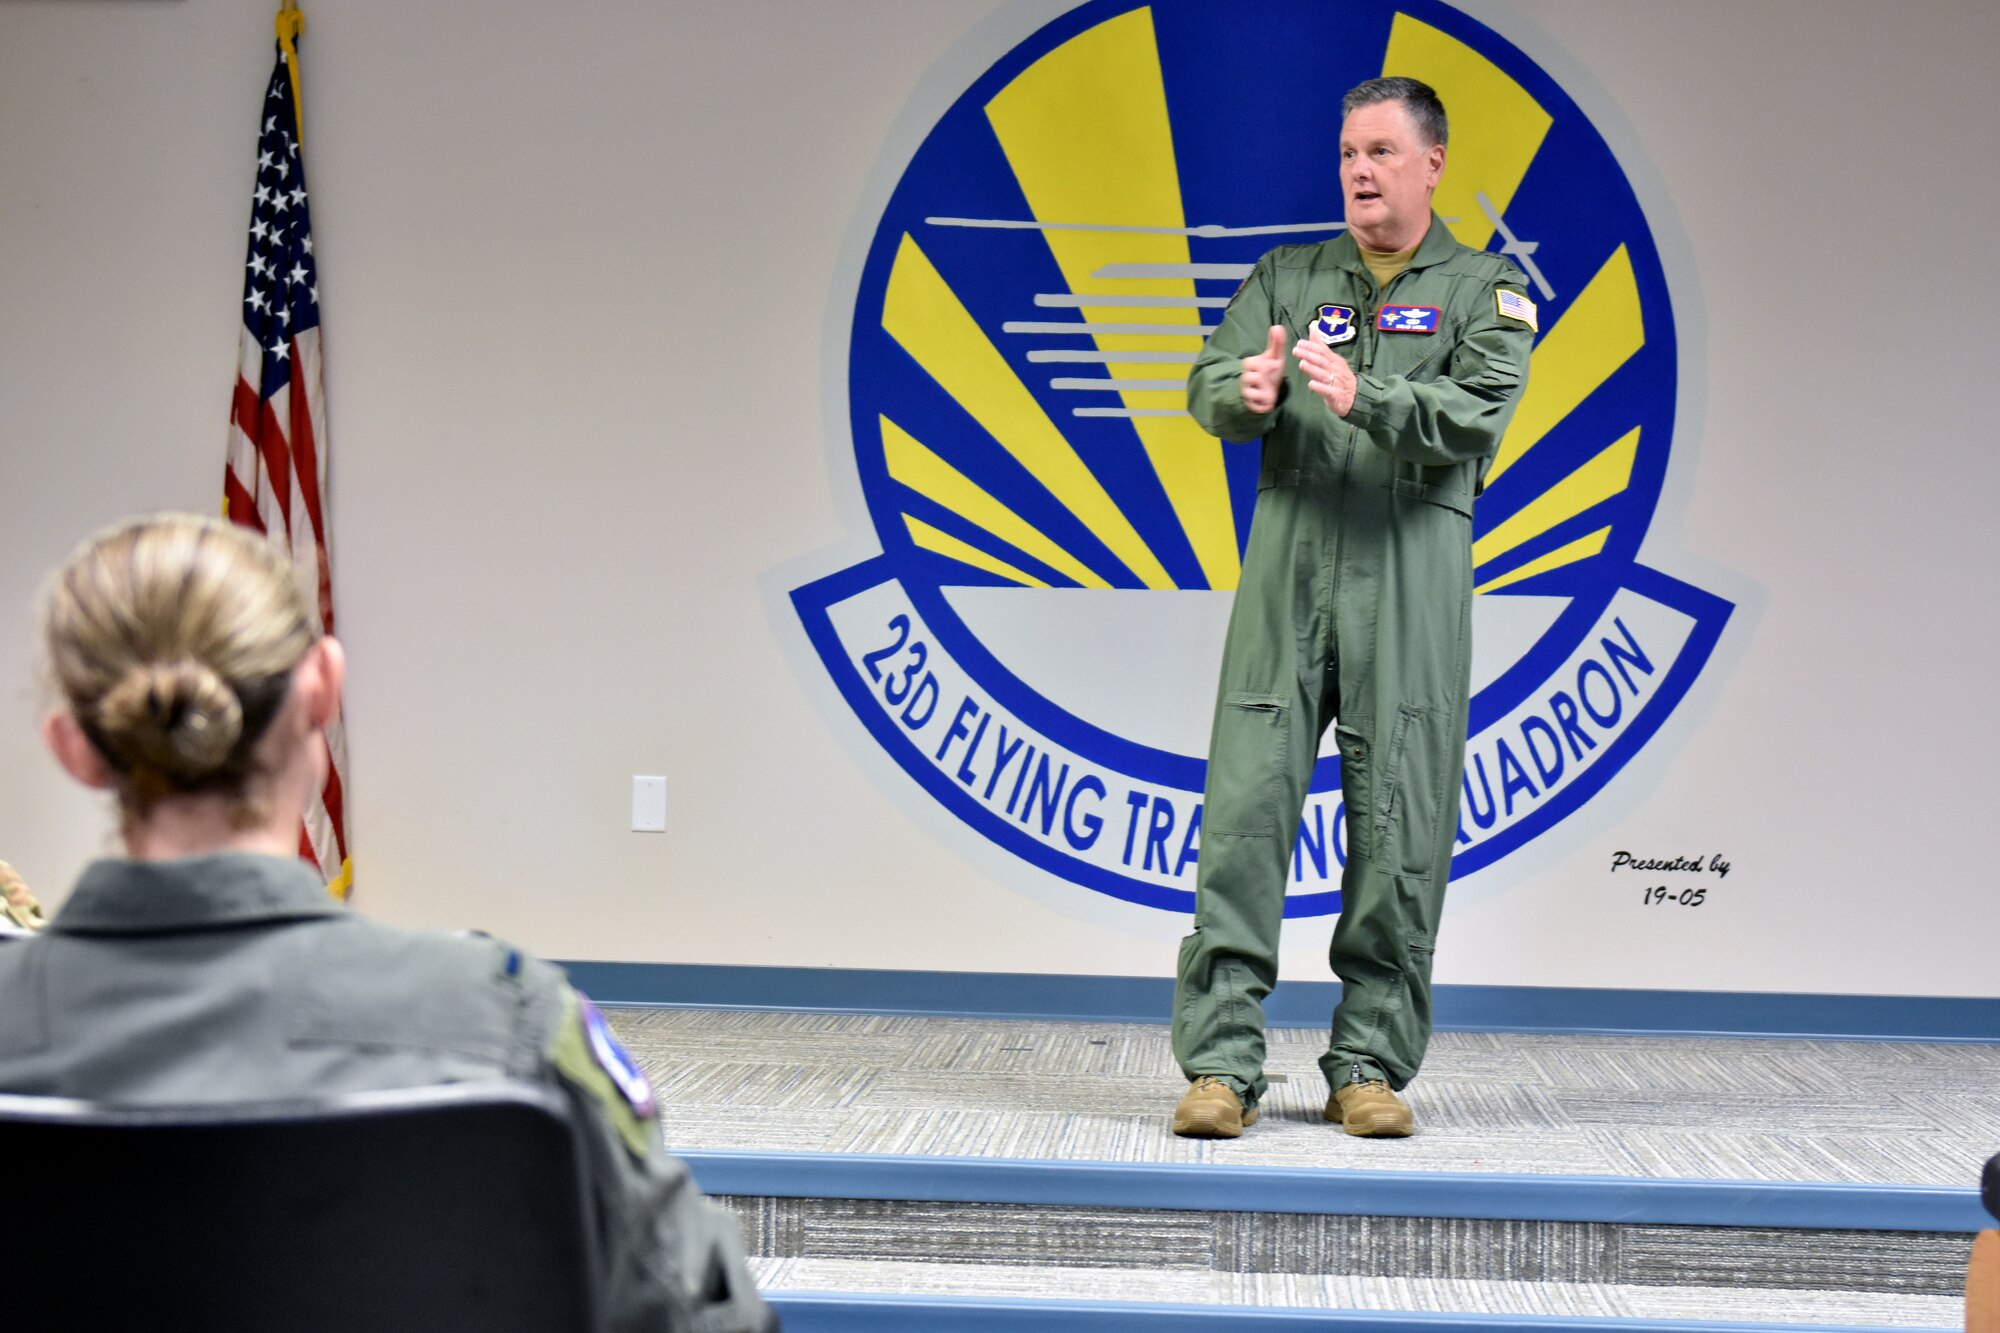 Lt. Gen. Brad Webb, commander of Air Education and Training Command, speaks to the Airmen of the 23rd Flying Training prior to presenting the General Larry O. Spencer Innovation Award at Fort Rucker, Alabama, June 22, 2021. The Helicopter Training Next Team was recognized as Air Education and Training Command-level team winner of the General Larry O. Spencer Innovation Award. The award is intended to annually recognize Airmen who come up with creative and efficient ways to save money and time